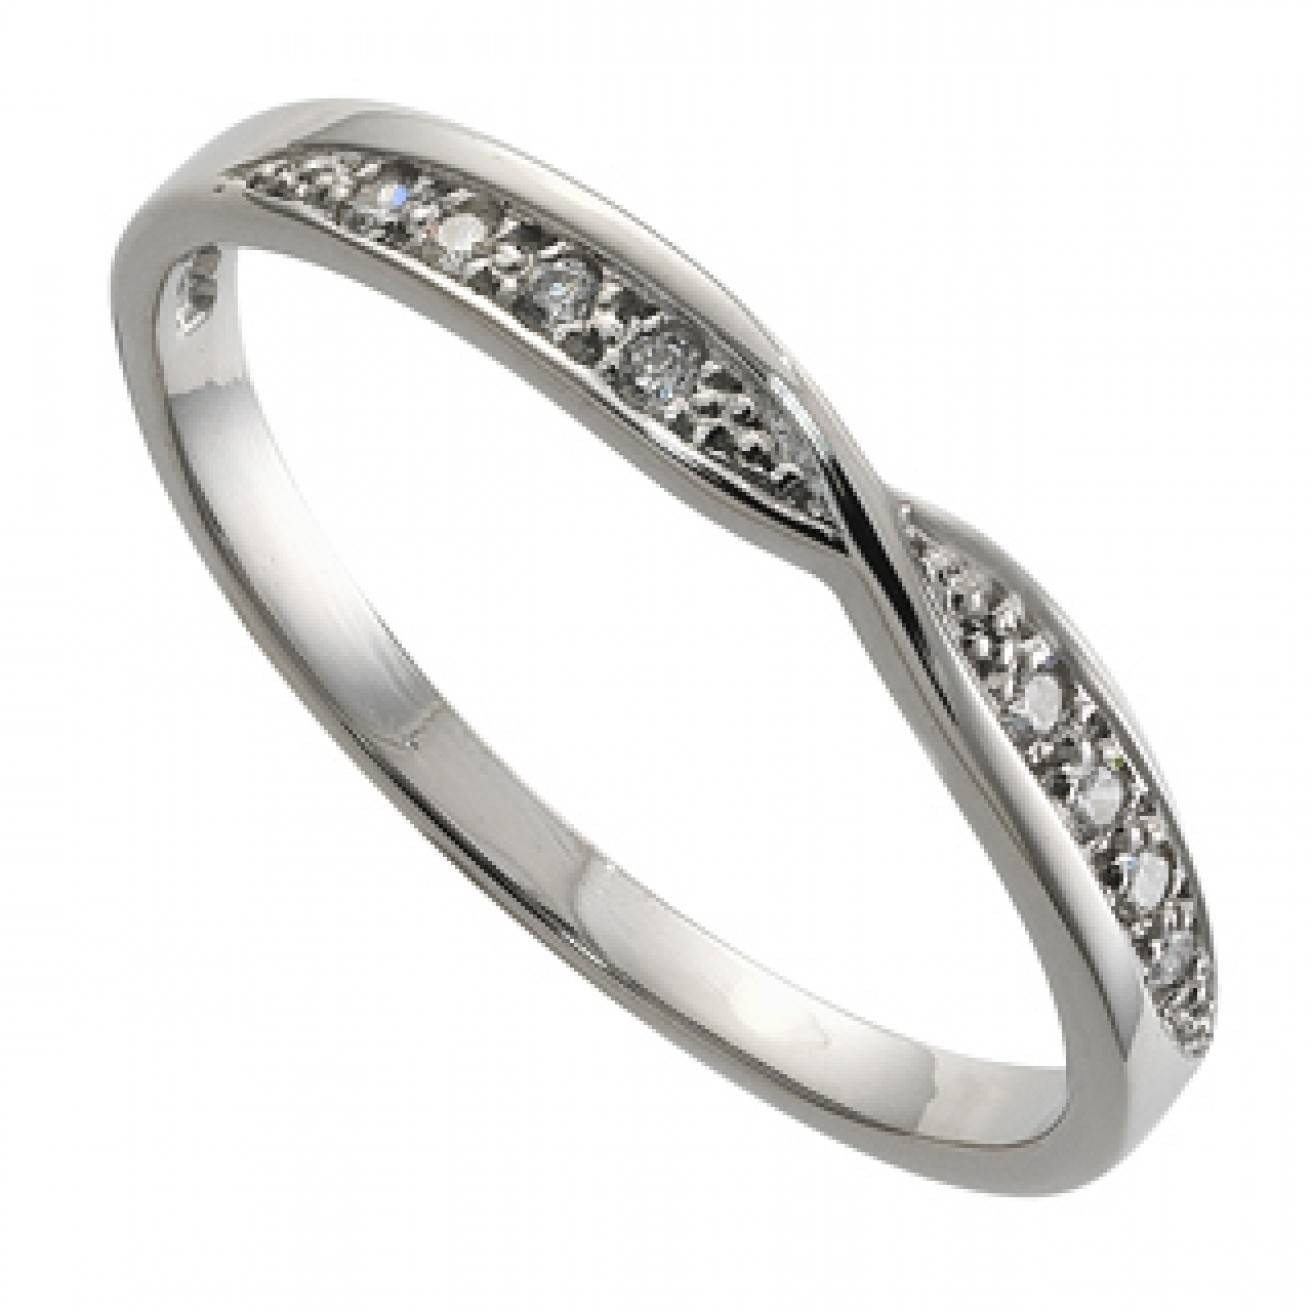 Women's Platinum Wedding Rings
 15 Collection of Platinum Wedding Rings For Women